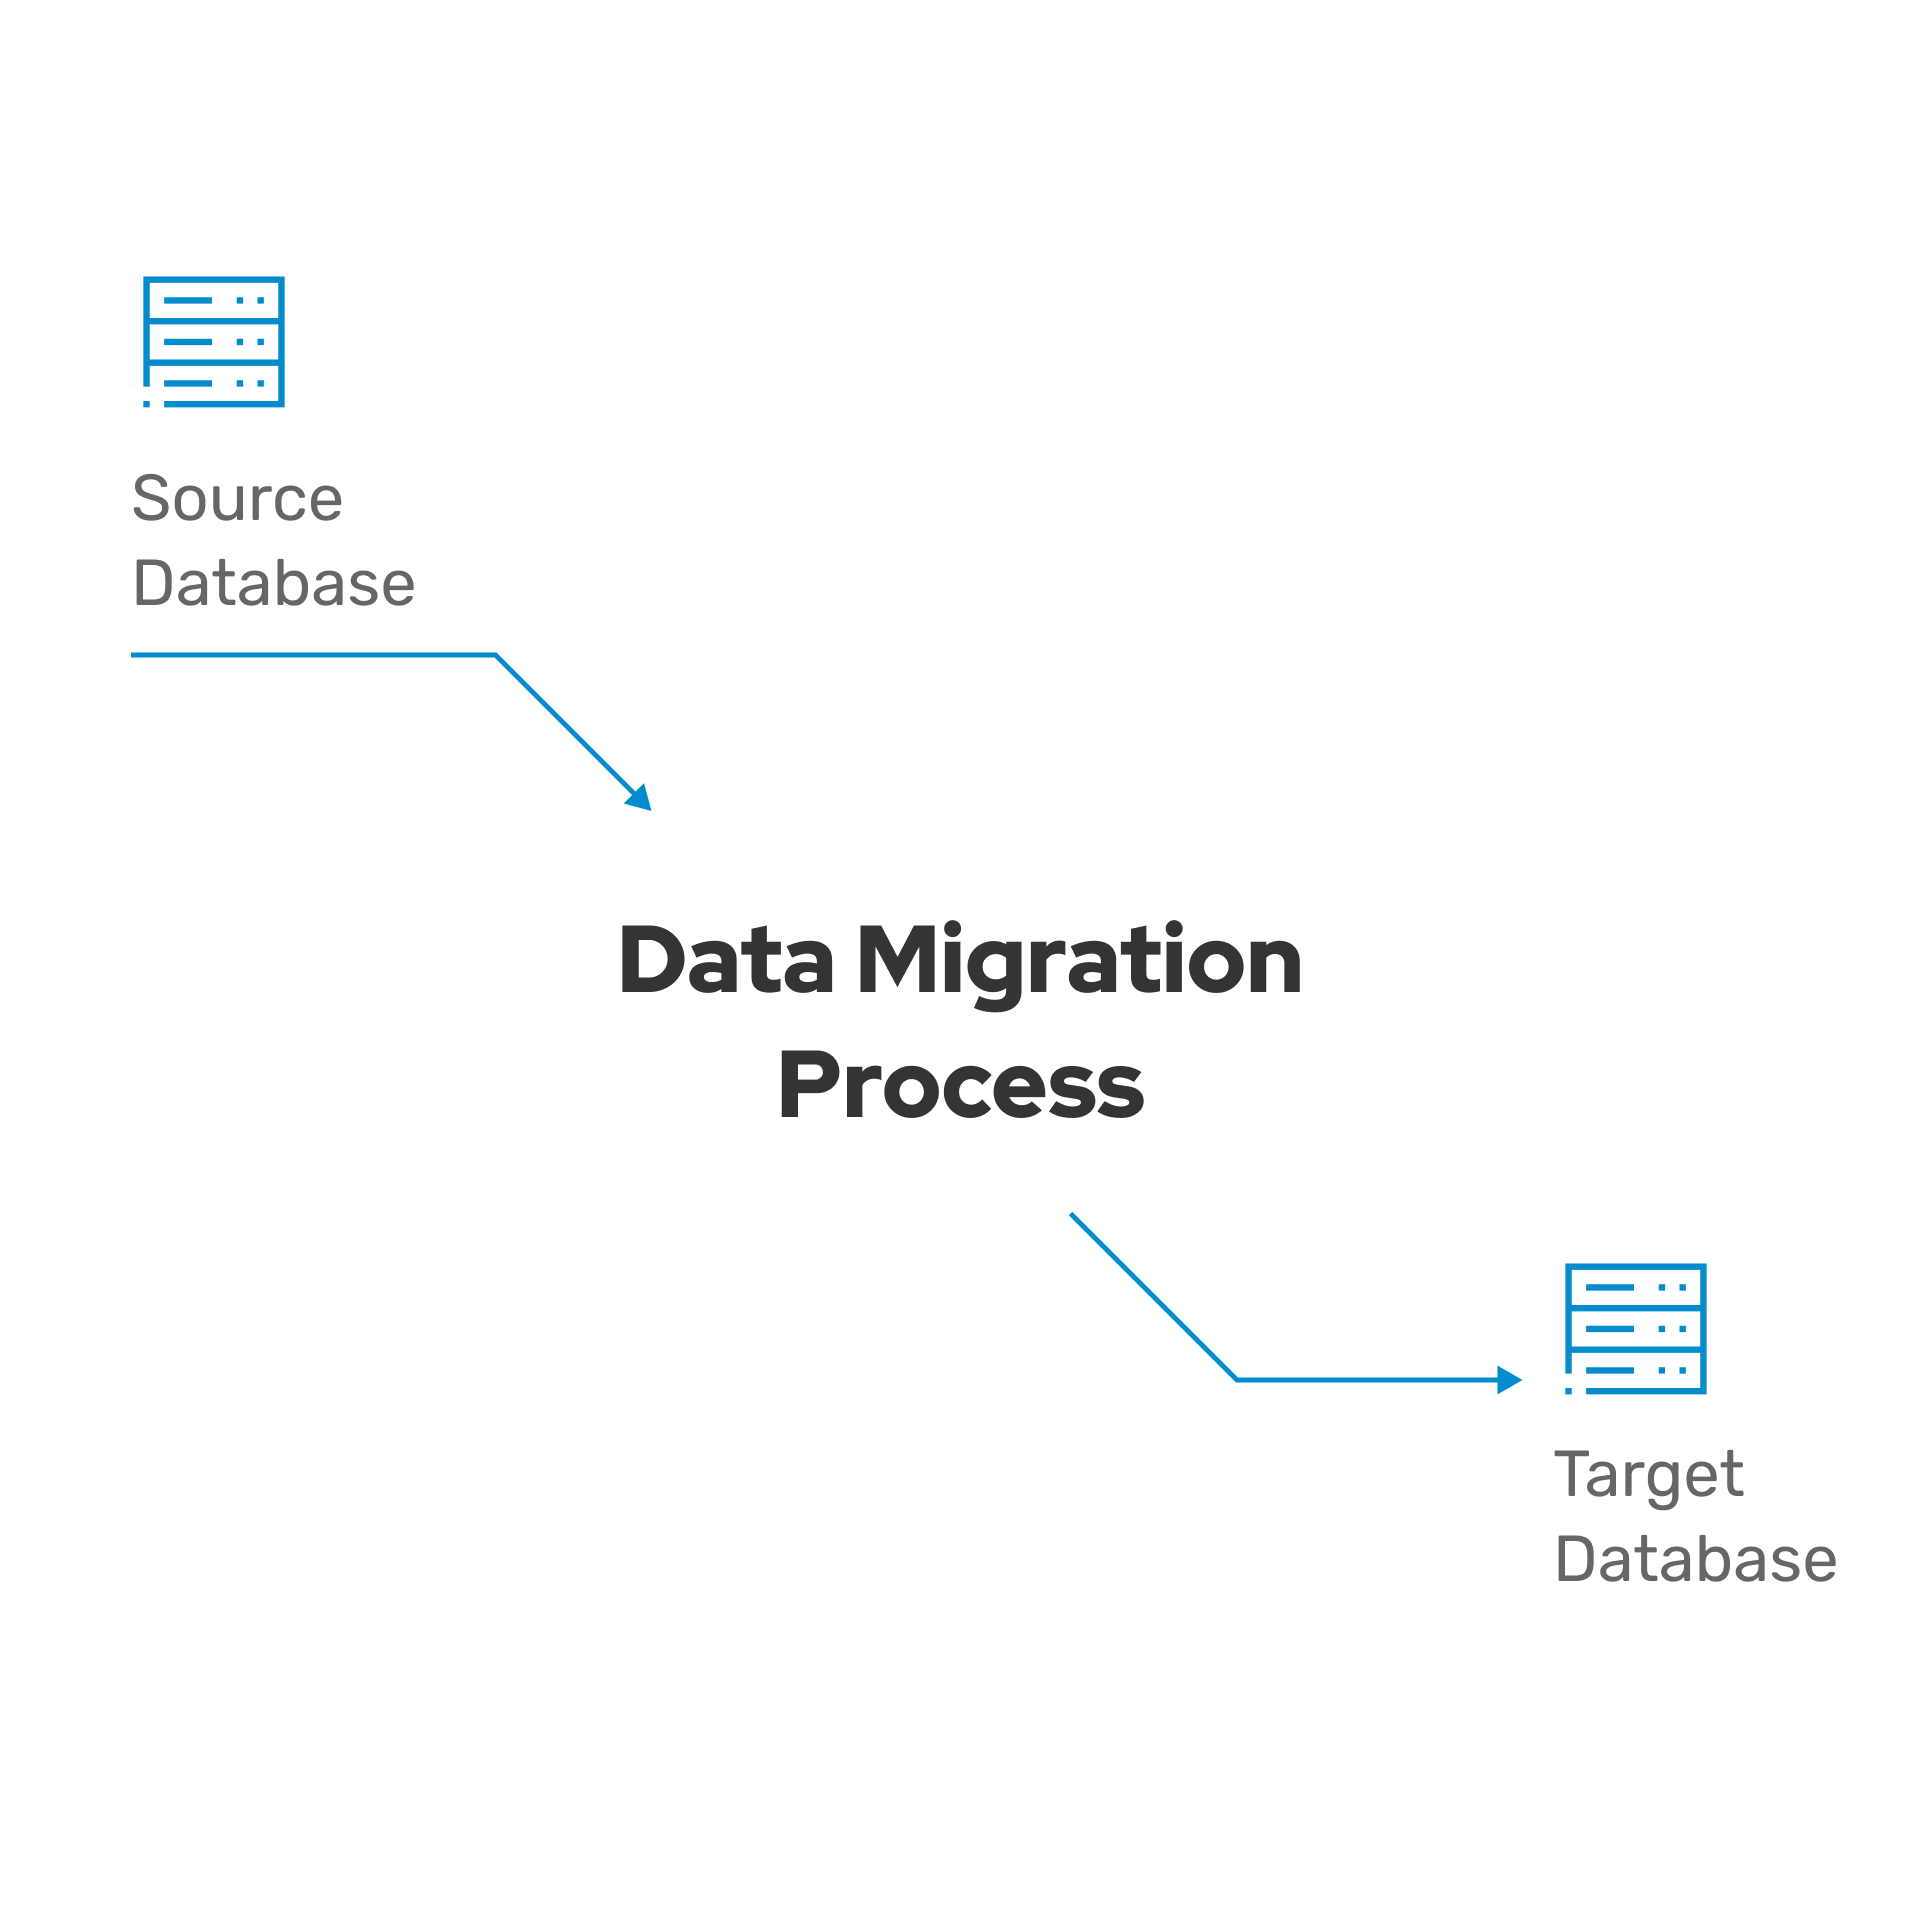 Database migration process implies moving data from an old database to a newer, more advanced one.